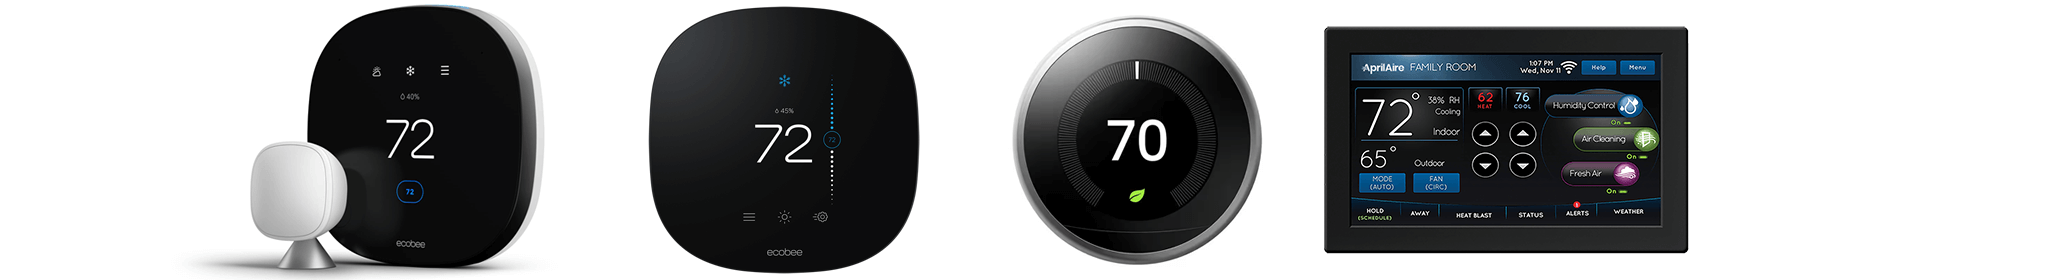 So many smart thermostats to choose from!